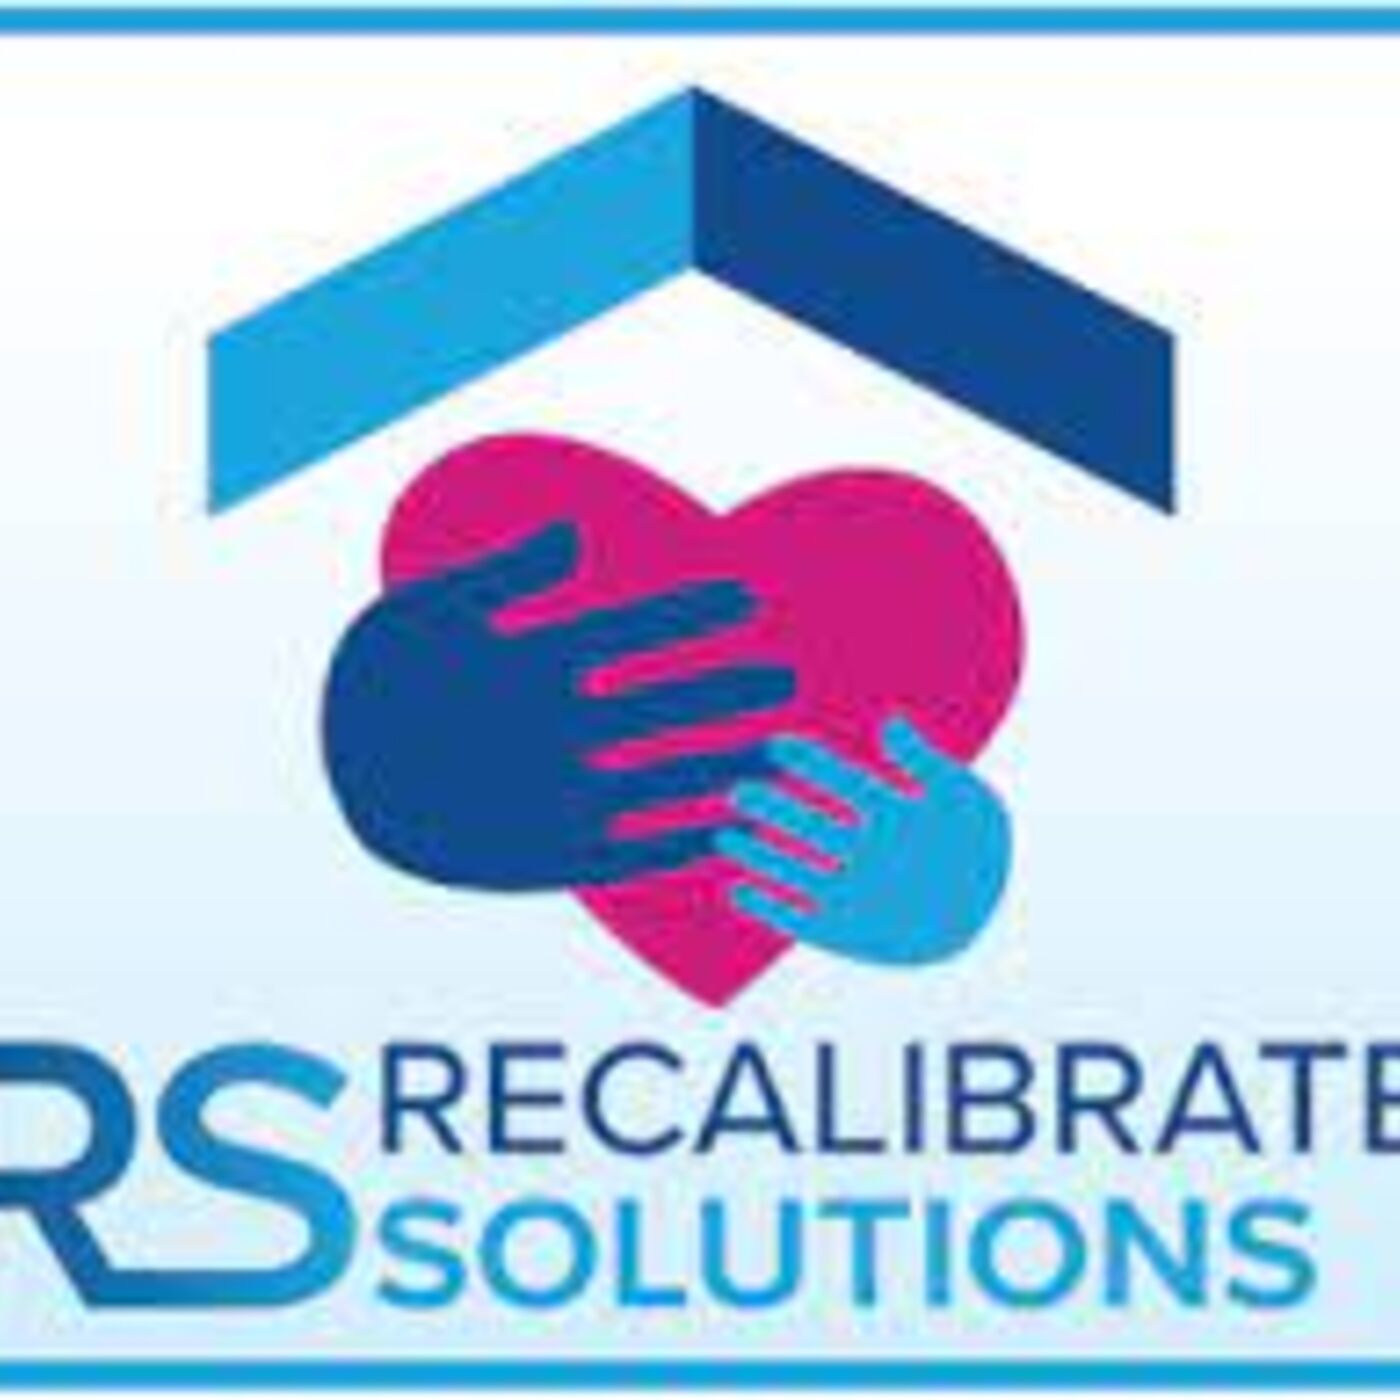 Startup Profile: Recalibrate Solutions (008)